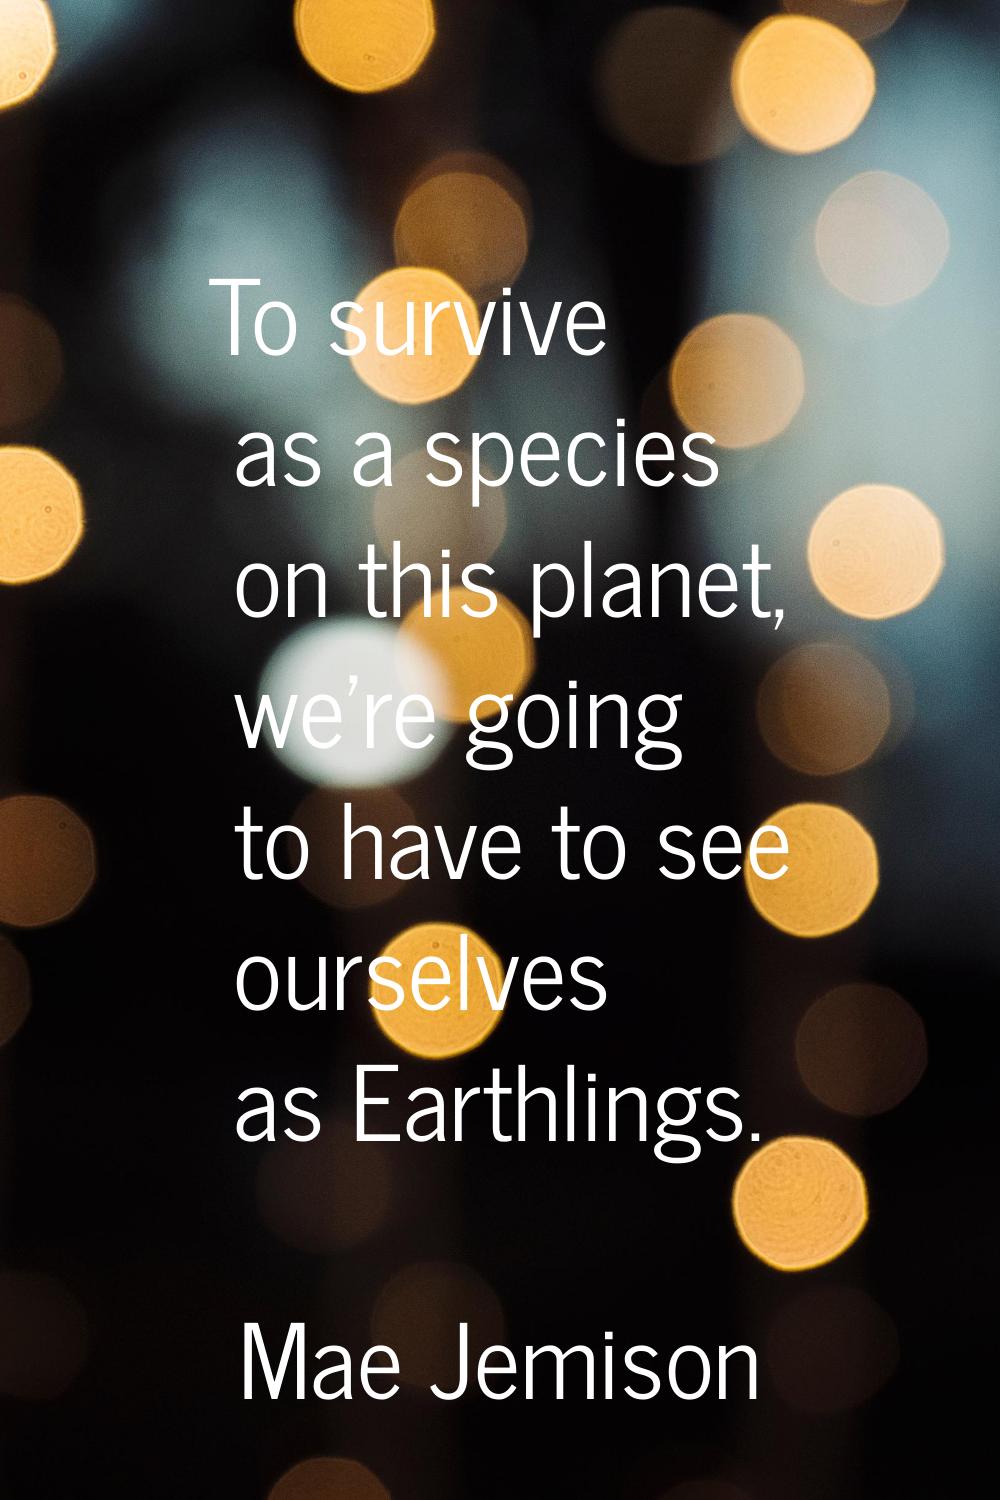 To survive as a species on this planet, we're going to have to see ourselves as Earthlings.